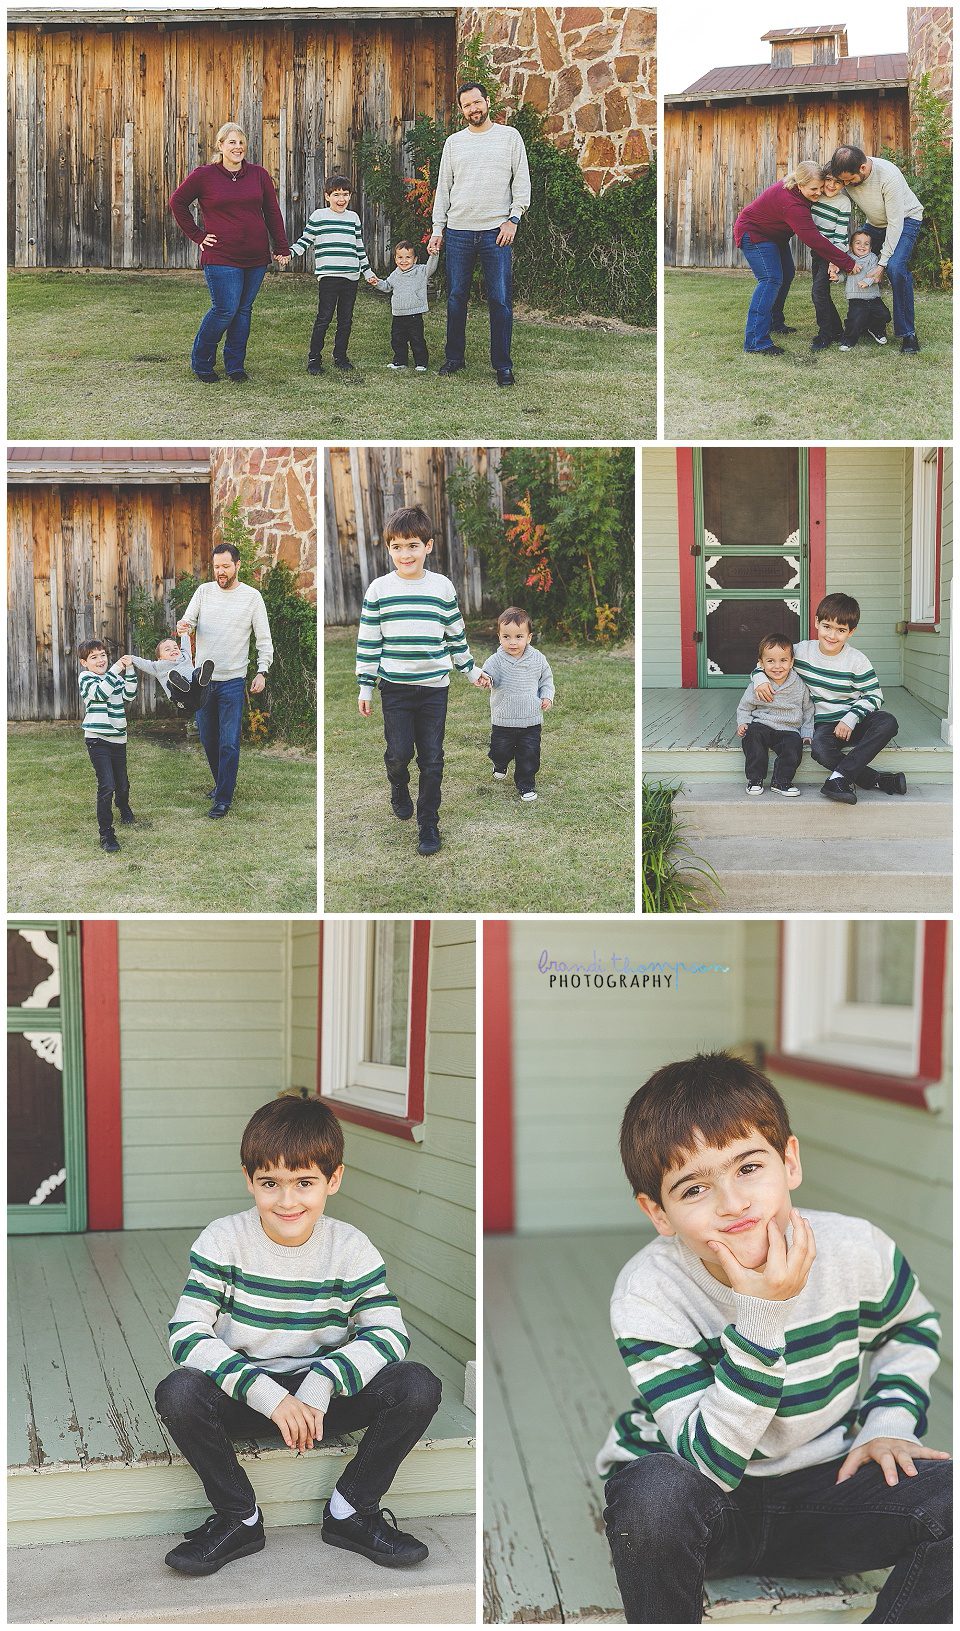 outdoor family photos with dad, mom, two young boys at a rustic setting in frisco, tx